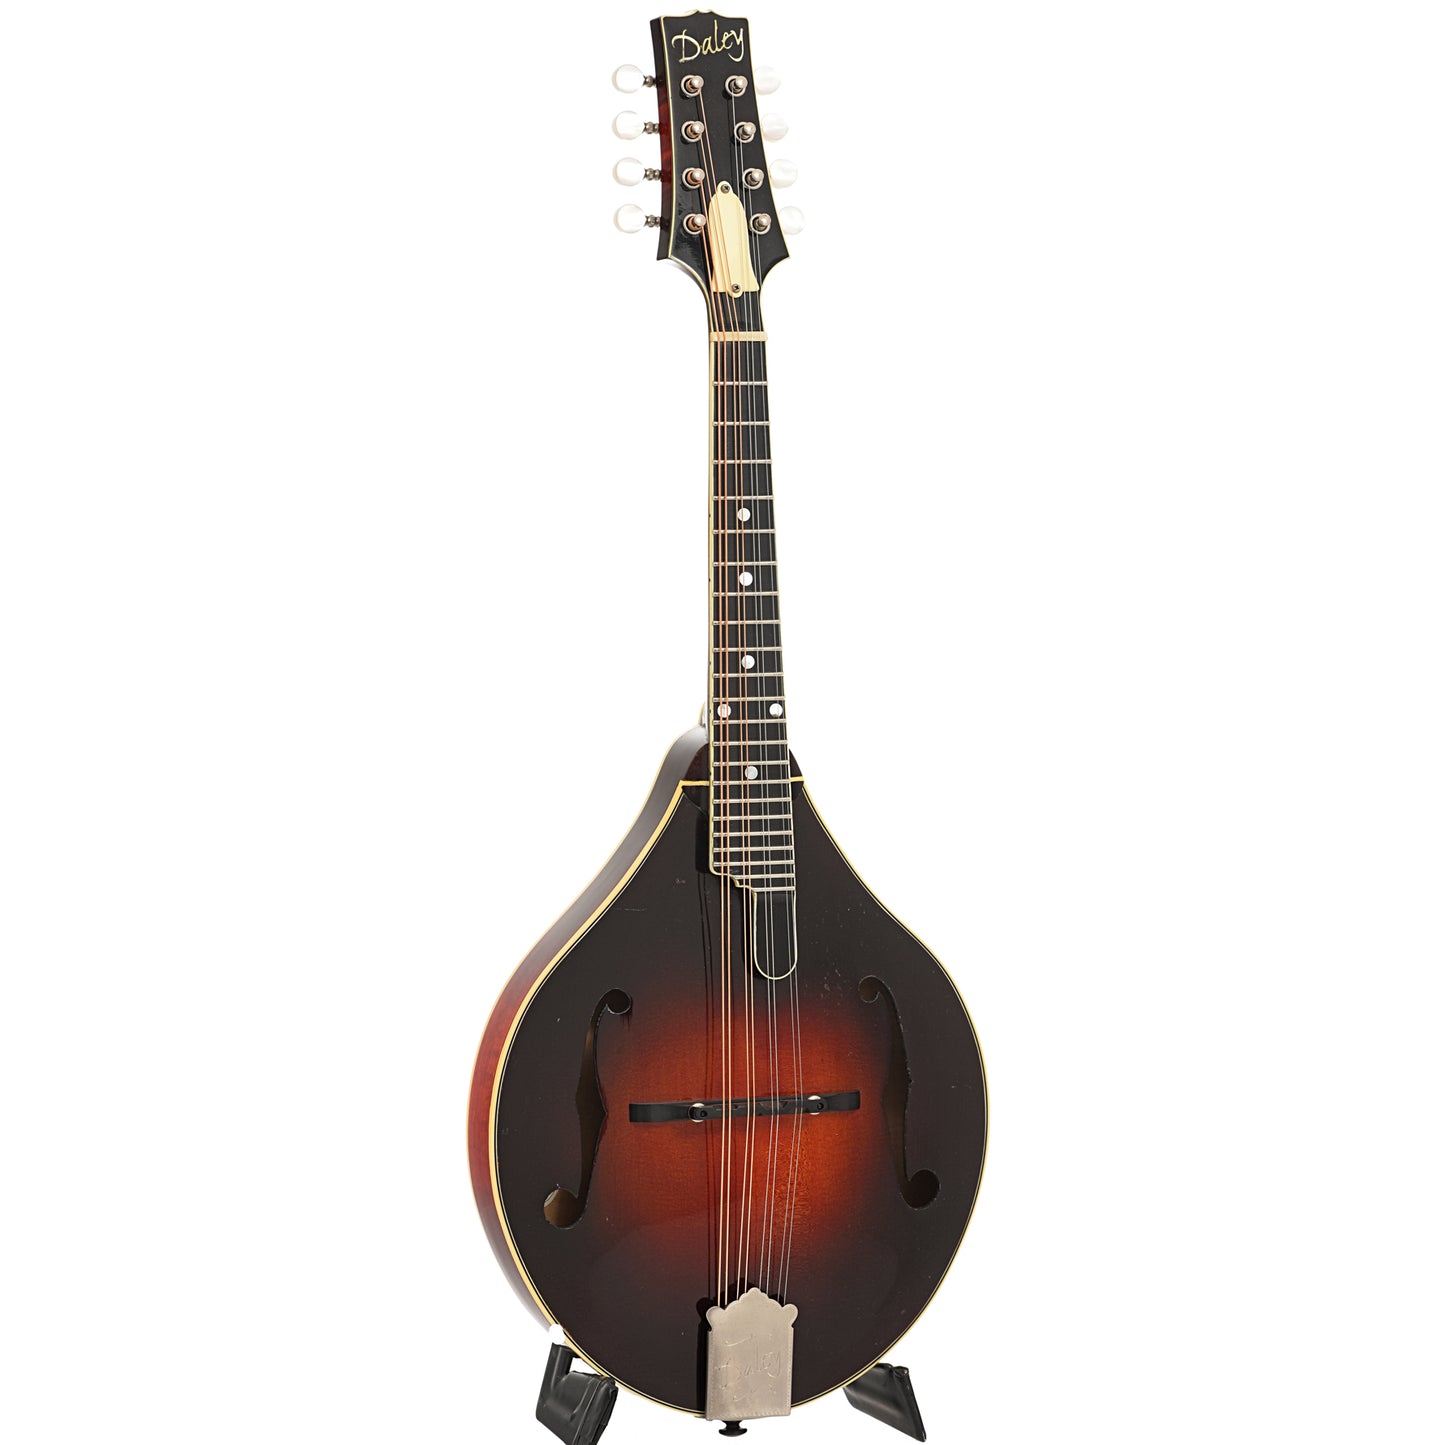 Full front and side of Daley Classic A Mandolin